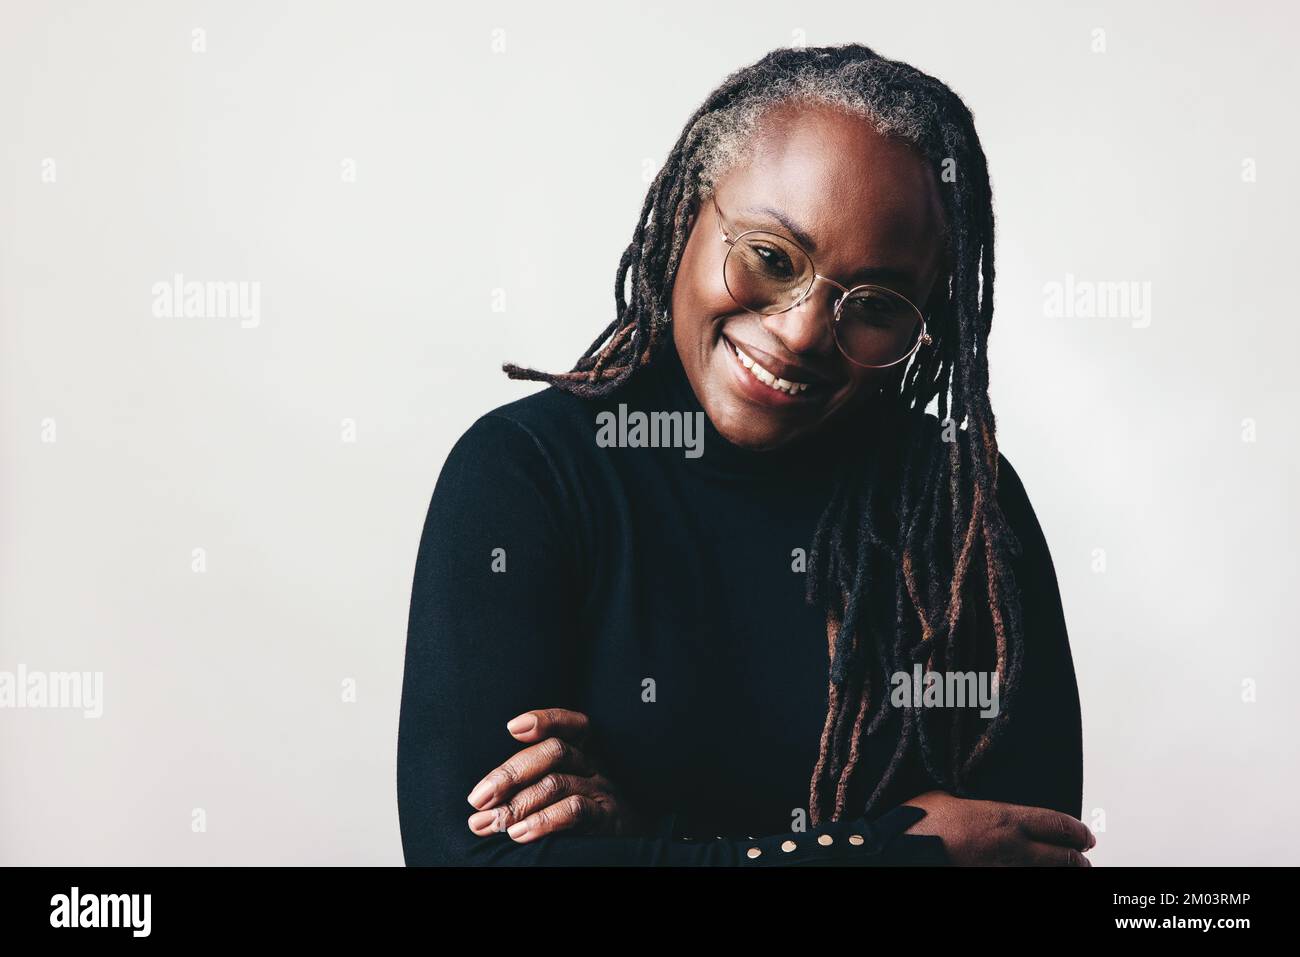 Happy professional woman smiling at the camera while wearing eyeglasses in a studio. Middle-aged woman with dreadlocks standing against a grey backgro Stock Photo